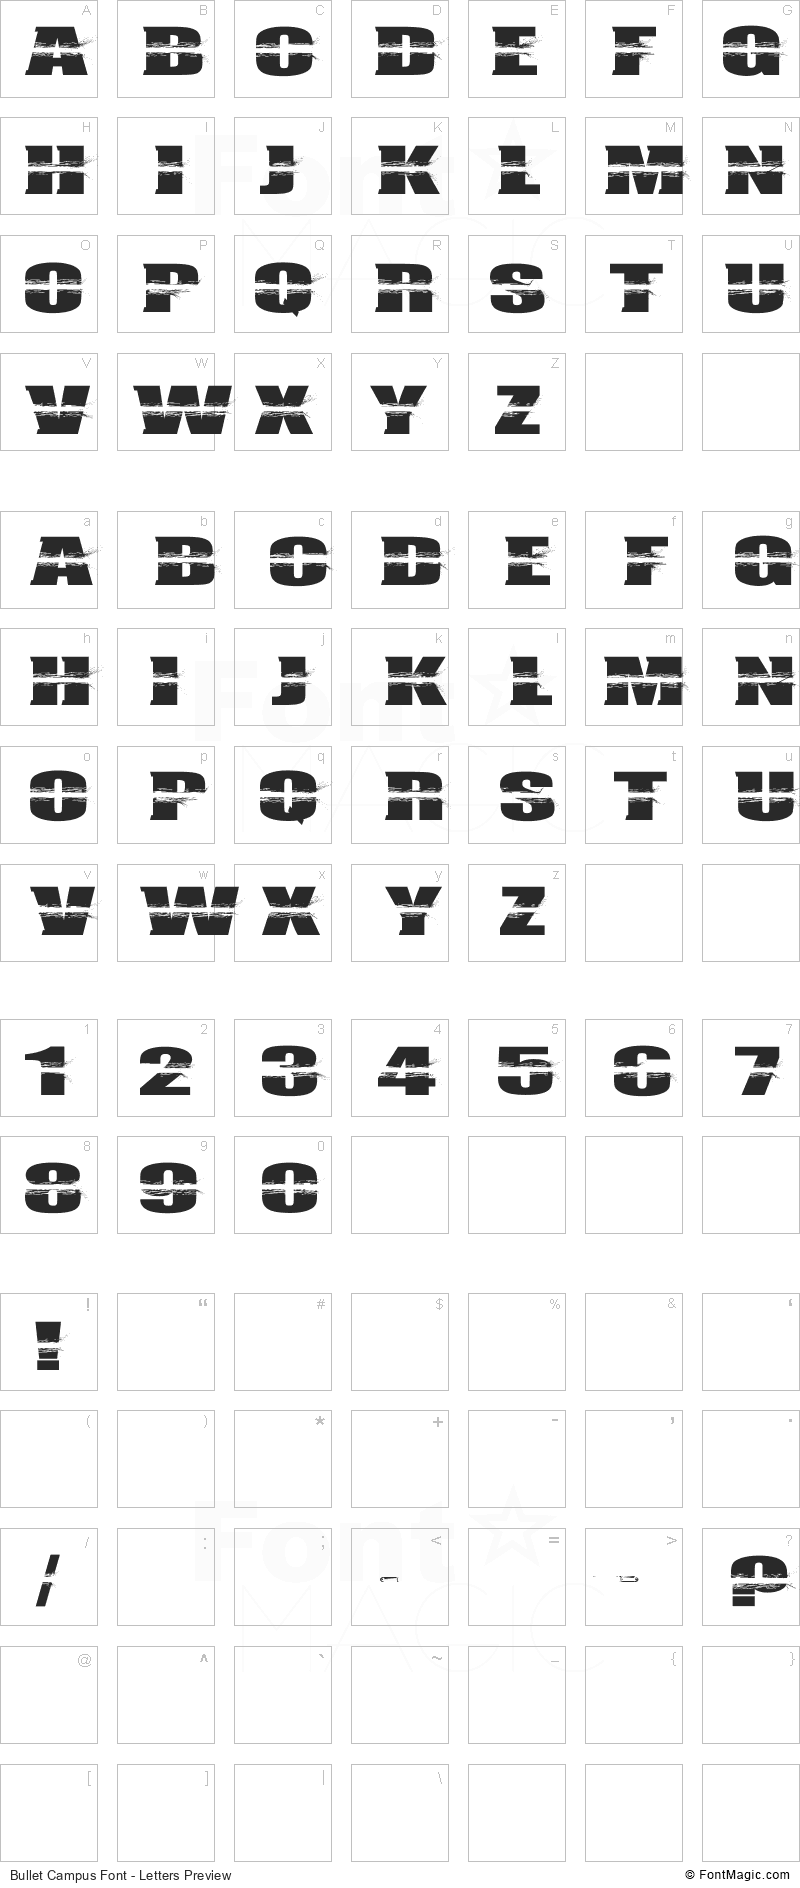 Bullet Campus Font - All Latters Preview Chart